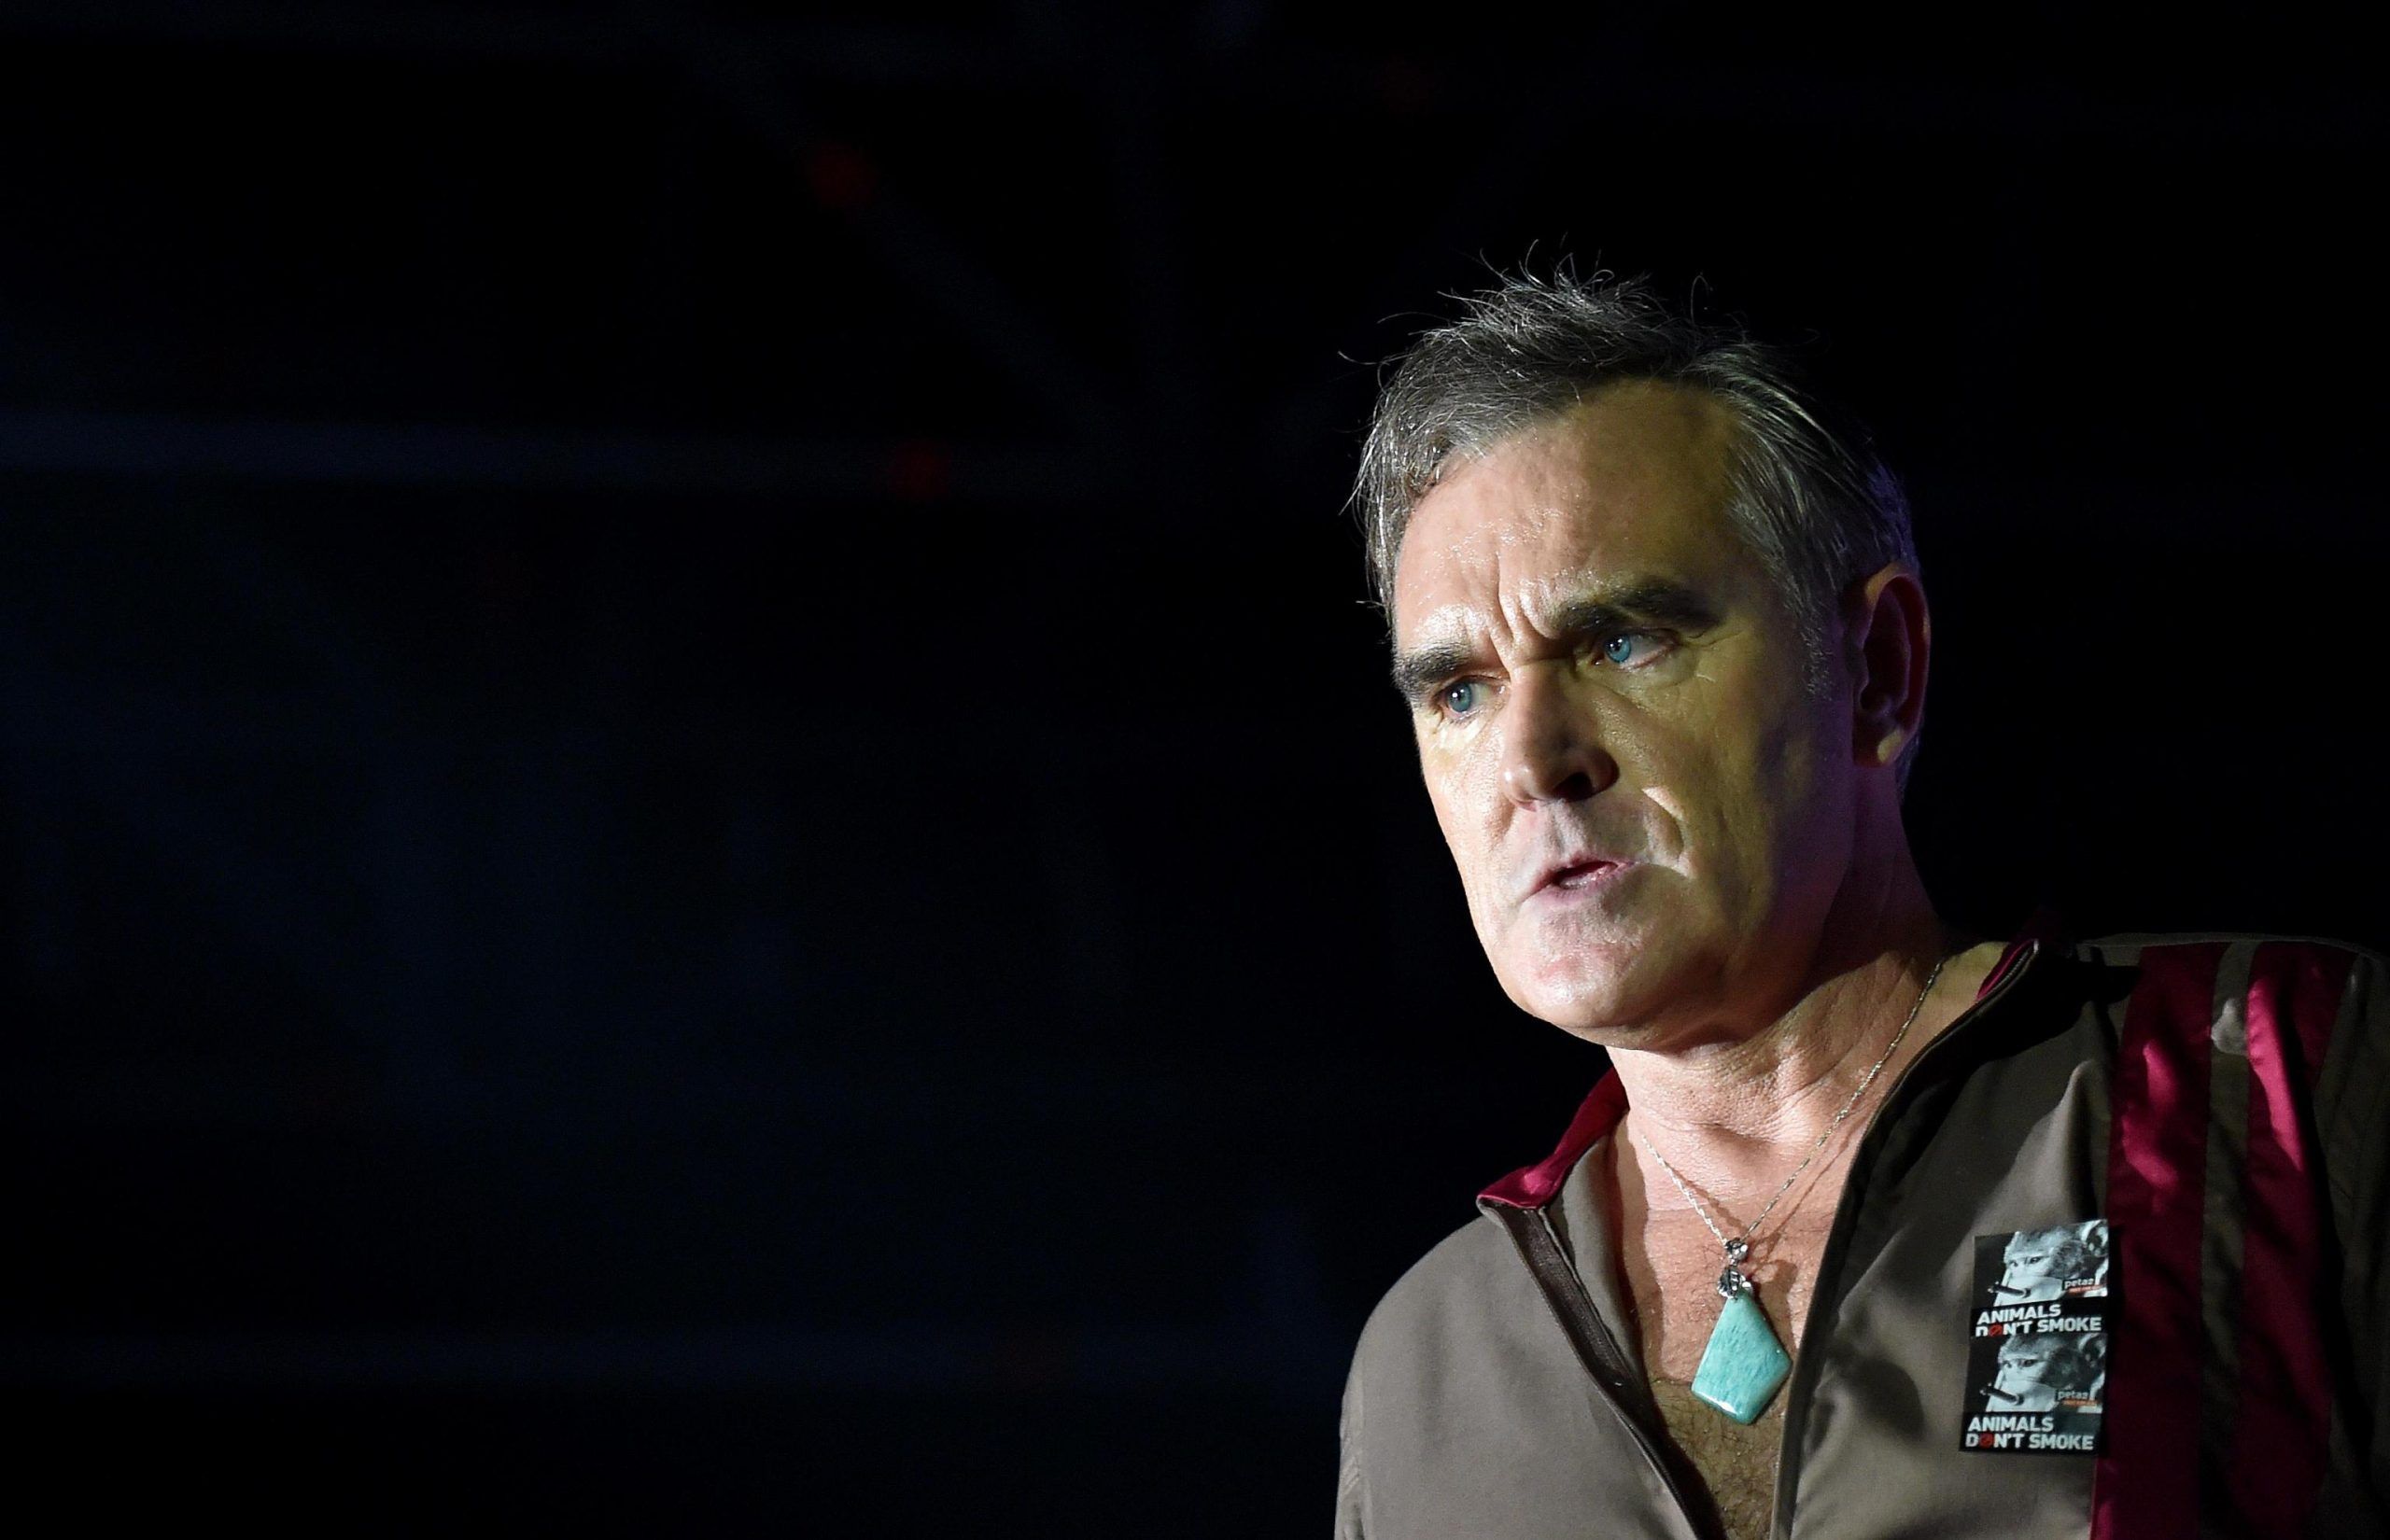 Former Smiths frontman Morrissey performs on stage